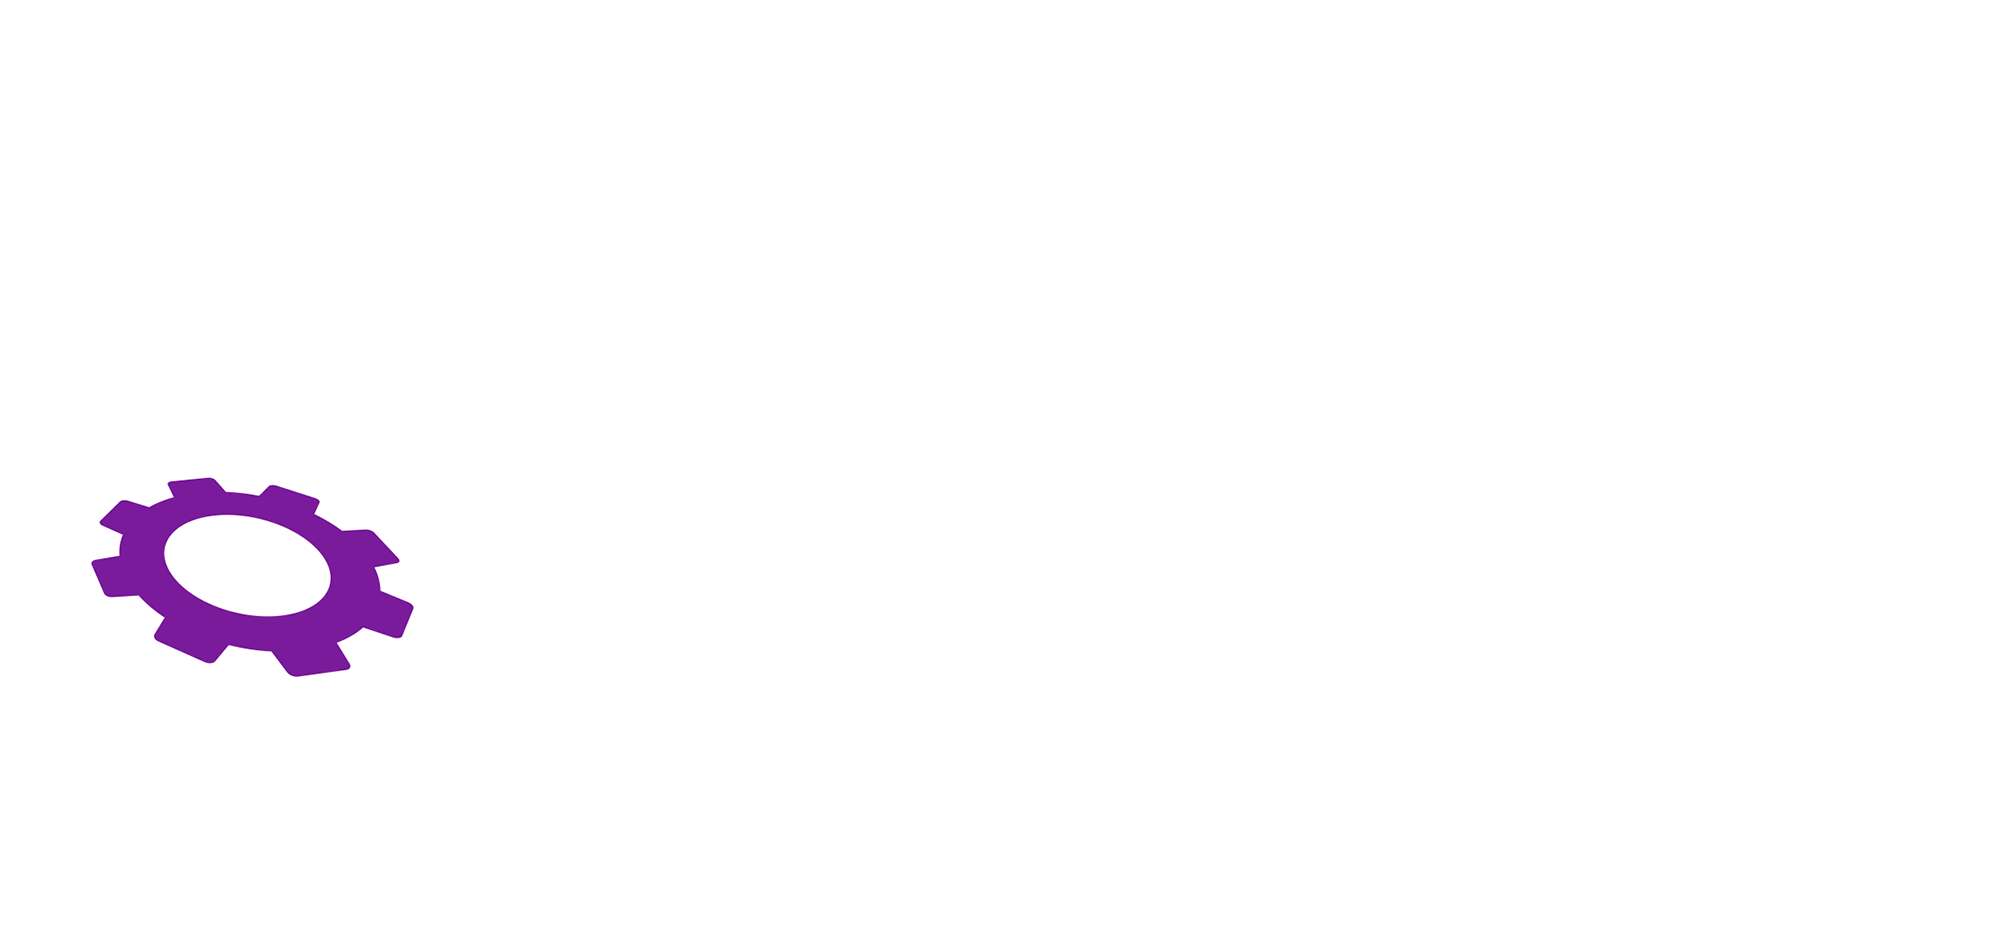 Magic Bookifier - Turn your ideas into a book